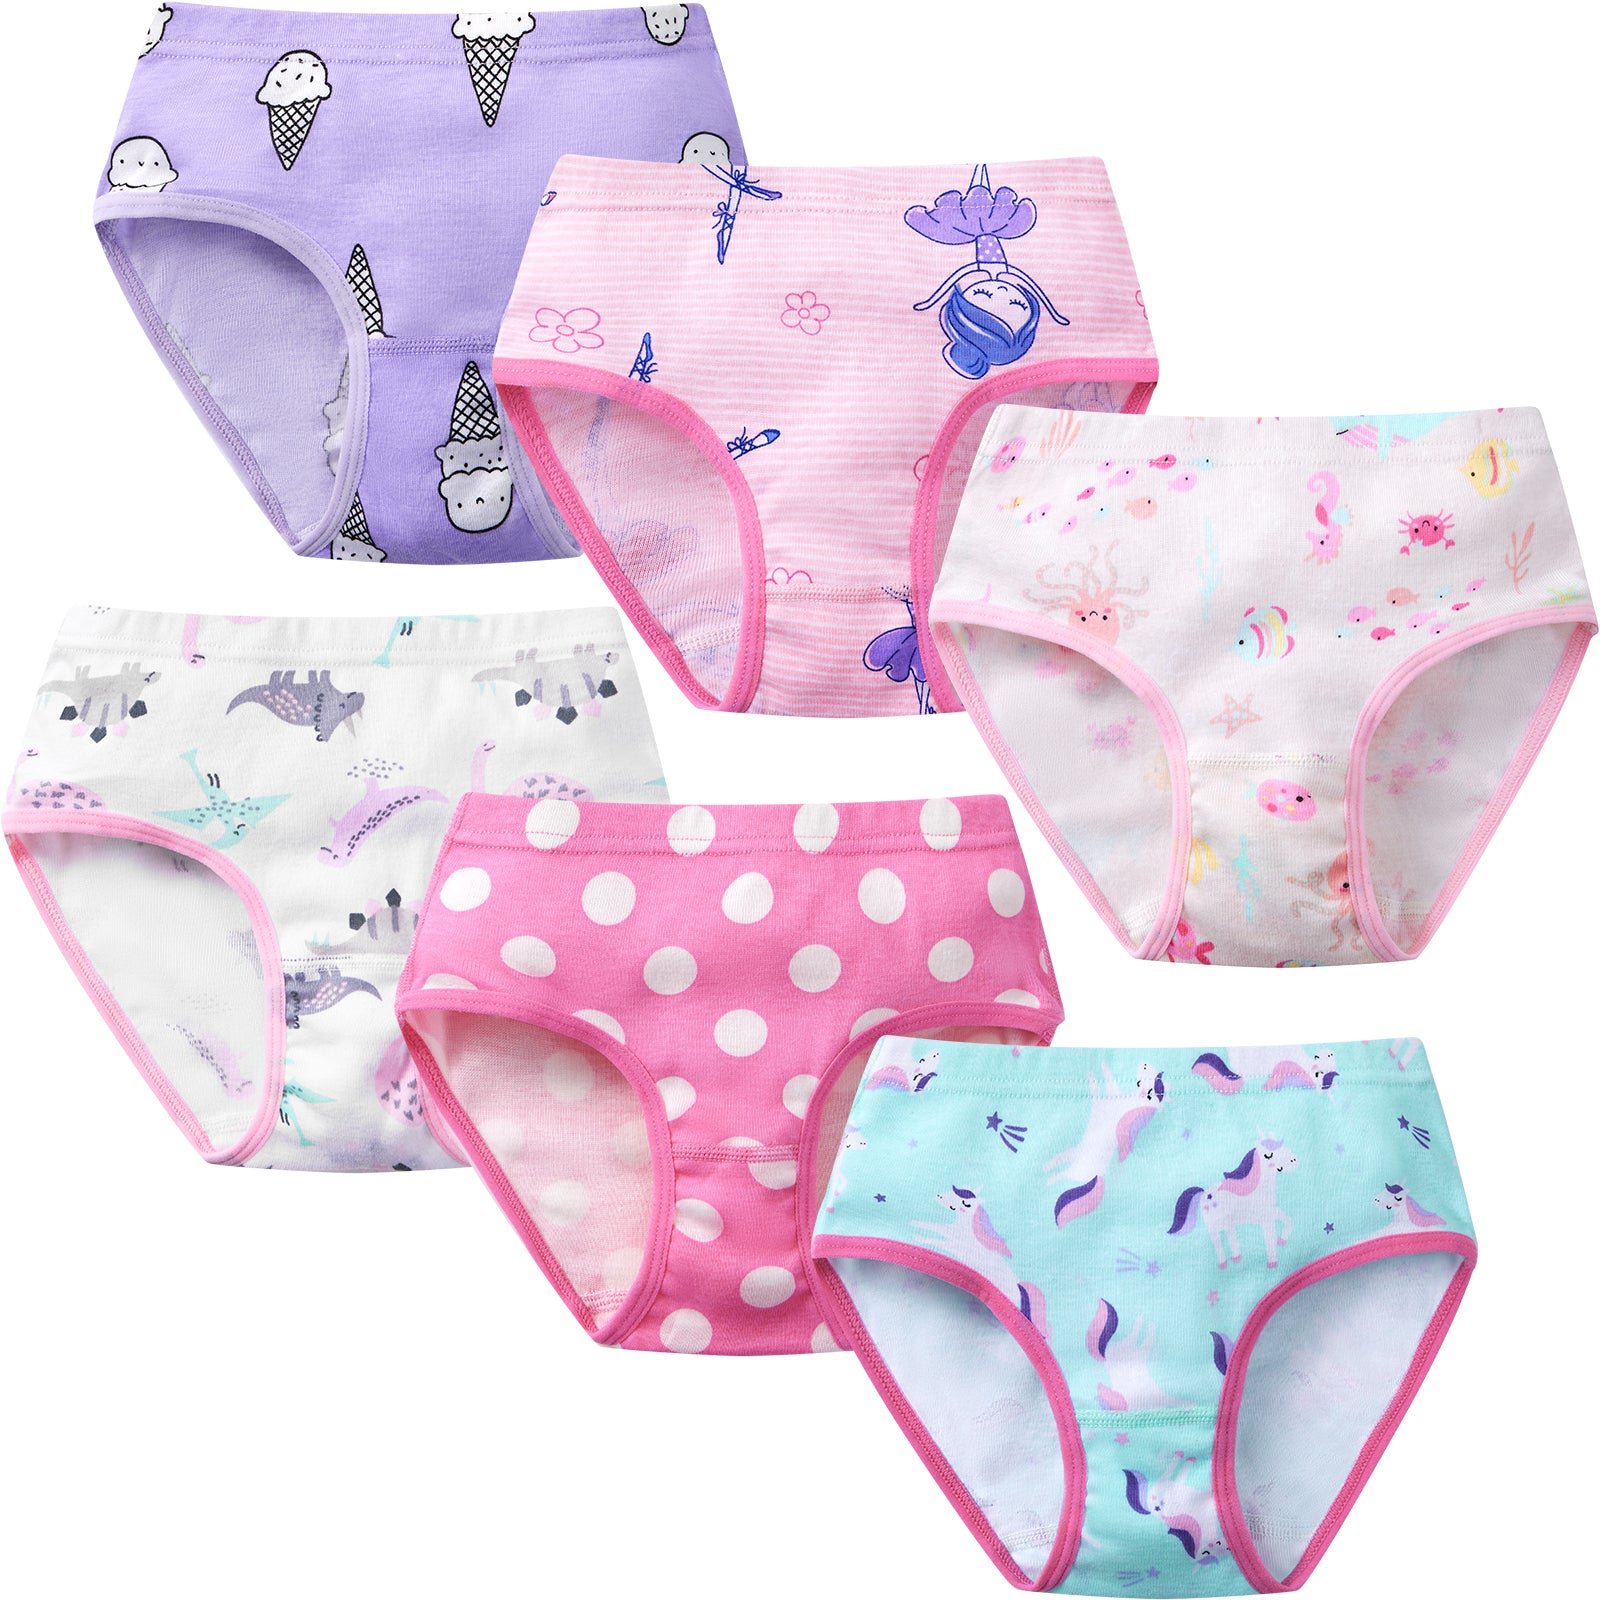 2,220 Teen Panty Images, Stock Photos, 3D objects, & Vectors